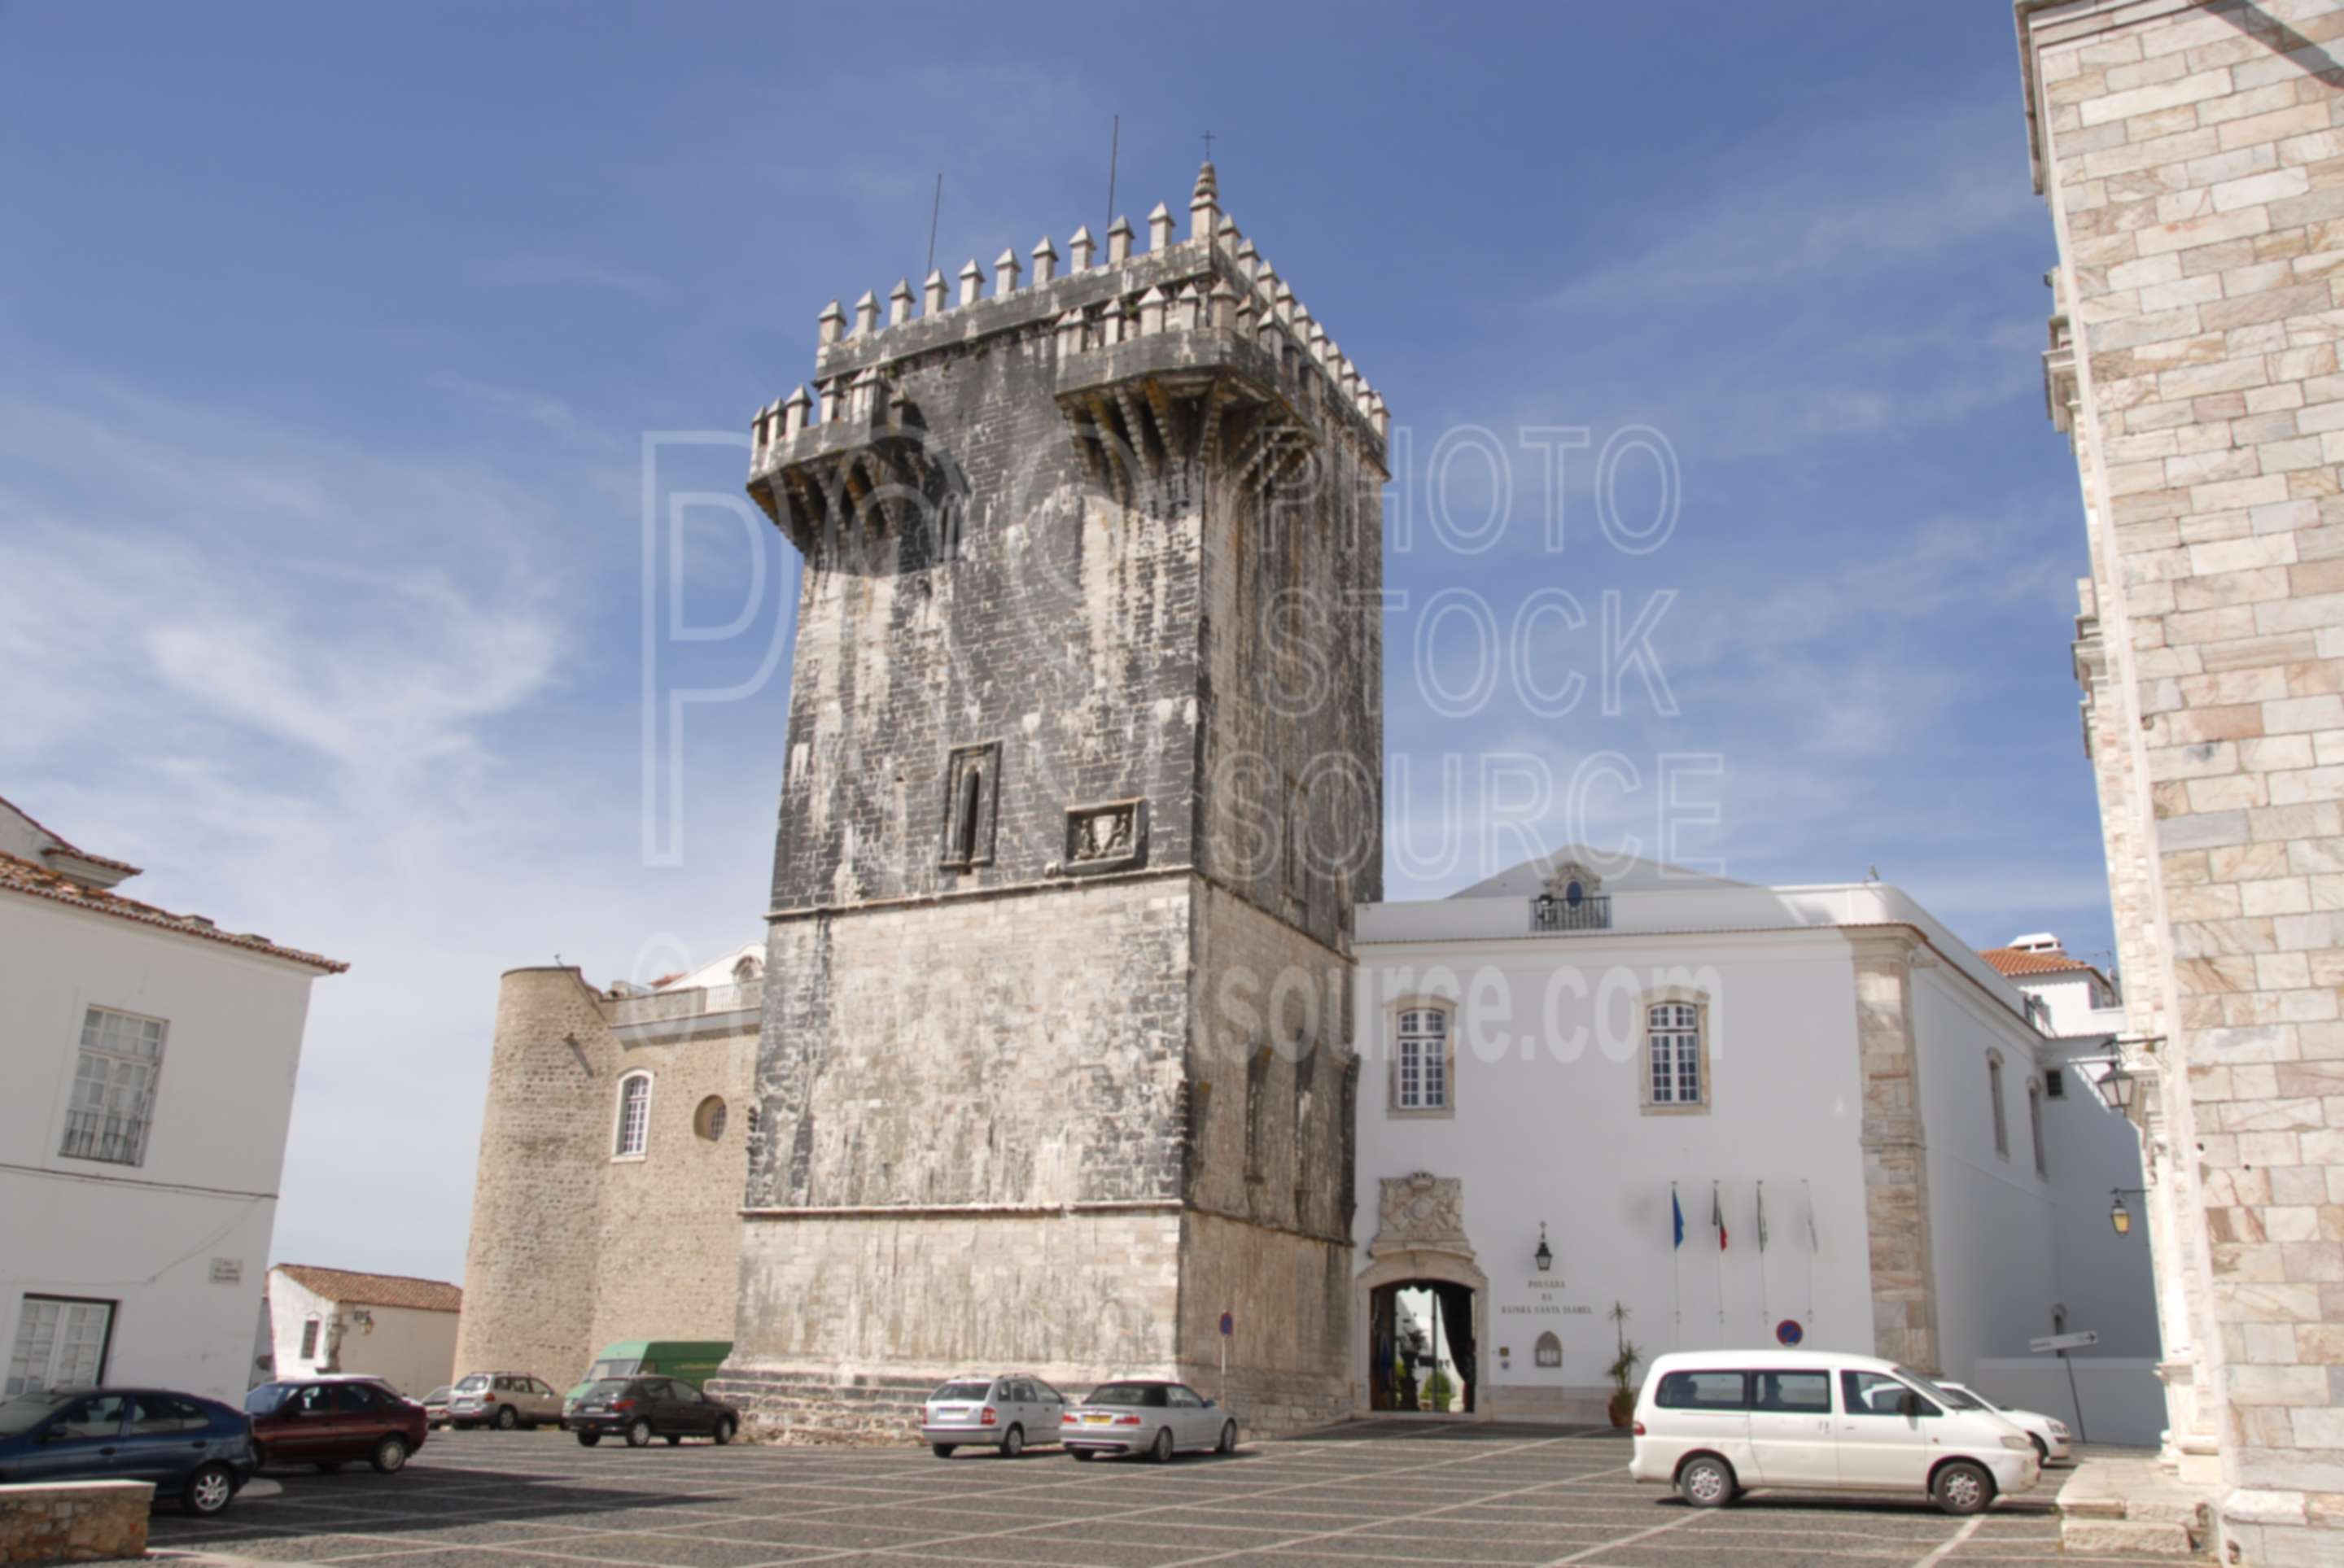 Torre das Tres Coroas,tower,tower of the three crowns,castles